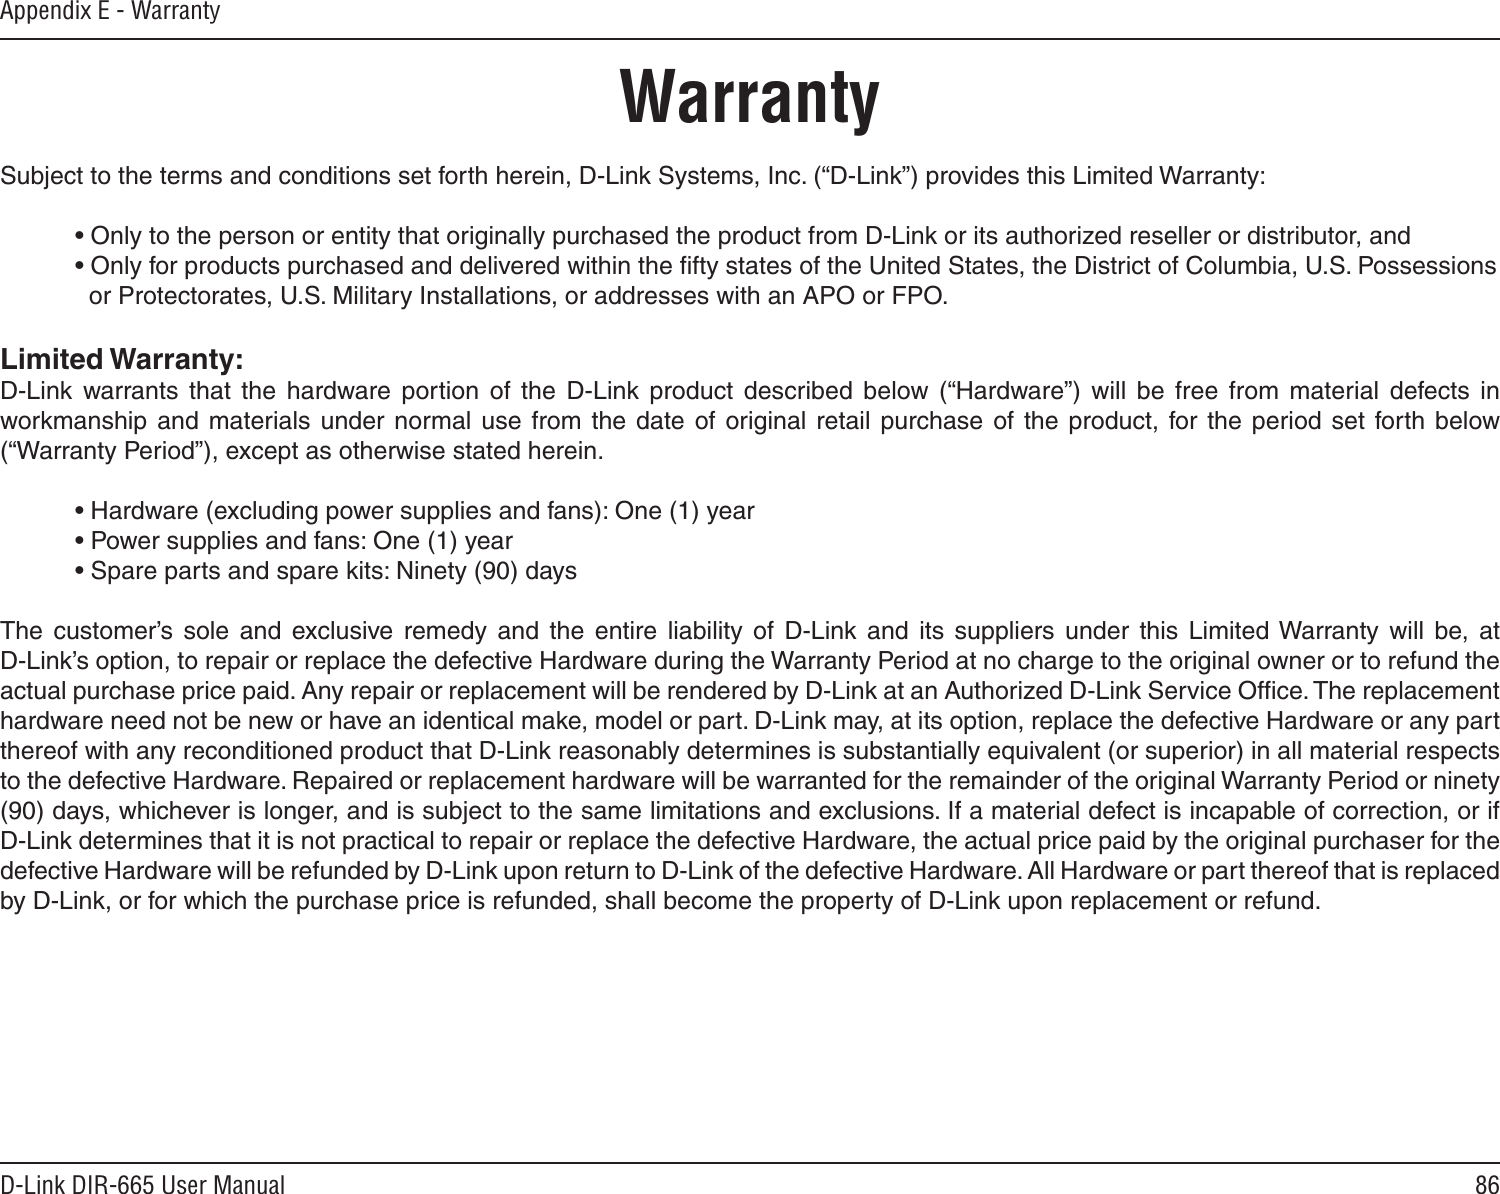 86D-Link DIR-665 User ManualAppendix E - WarrantyWarrantySubject to the terms and conditions set forth herein, D-Link Systems, Inc. (“D-Link”) provides this Limited Warranty:  • Only to the person or entity that originally purchased the product from D-Link or its authorized reseller or distributor, and  • Only for products purchased and delivered within the ﬁfty states of the United States, the District of Columbia, U.S. Possessions      or Protectorates, U.S. Military Installations, or addresses with an APO or FPO.Limited Warranty:D-Link  warrants  that  the  hardware  portion  of  the  D-Link  product  described  below  (“Hardware”)  will  be  free  from  material  defects  in workmanship  and  materials under  normal  use  from  the  date  of  original retail  purchase  of  the  product,  for the  period set  forth below (“Warranty Period”), except as otherwise stated herein.  • Hardware (excluding power supplies and fans): One (1) year  • Power supplies and fans: One (1) year  • Spare parts and spare kits: Ninety (90) daysThe  customer’s  sole  and  exclusive  remedy  and  the  entire  liability  of  D-Link  and  its  suppliers  under  this  Limited Warranty  will  be,  at  D-Link’s option, to repair or replace the defective Hardware during the Warranty Period at no charge to the original owner or to refund the actual purchase price paid. Any repair or replacement will be rendered by D-Link at an Authorized D-Link Service Ofﬁce. The replacement hardware need not be new or have an identical make, model or part. D-Link may, at its option, replace the defective Hardware or any part thereof with any reconditioned product that D-Link reasonably determines is substantially equivalent (or superior) in all material respects to the defective Hardware. Repaired or replacement hardware will be warranted for the remainder of the original Warranty Period or ninety (90) days, whichever is longer, and is subject to the same limitations and exclusions. If a material defect is incapable of correction, or if D-Link determines that it is not practical to repair or replace the defective Hardware, the actual price paid by the original purchaser for the defective Hardware will be refunded by D-Link upon return to D-Link of the defective Hardware. All Hardware or part thereof that is replaced by D-Link, or for which the purchase price is refunded, shall become the property of D-Link upon replacement or refund.